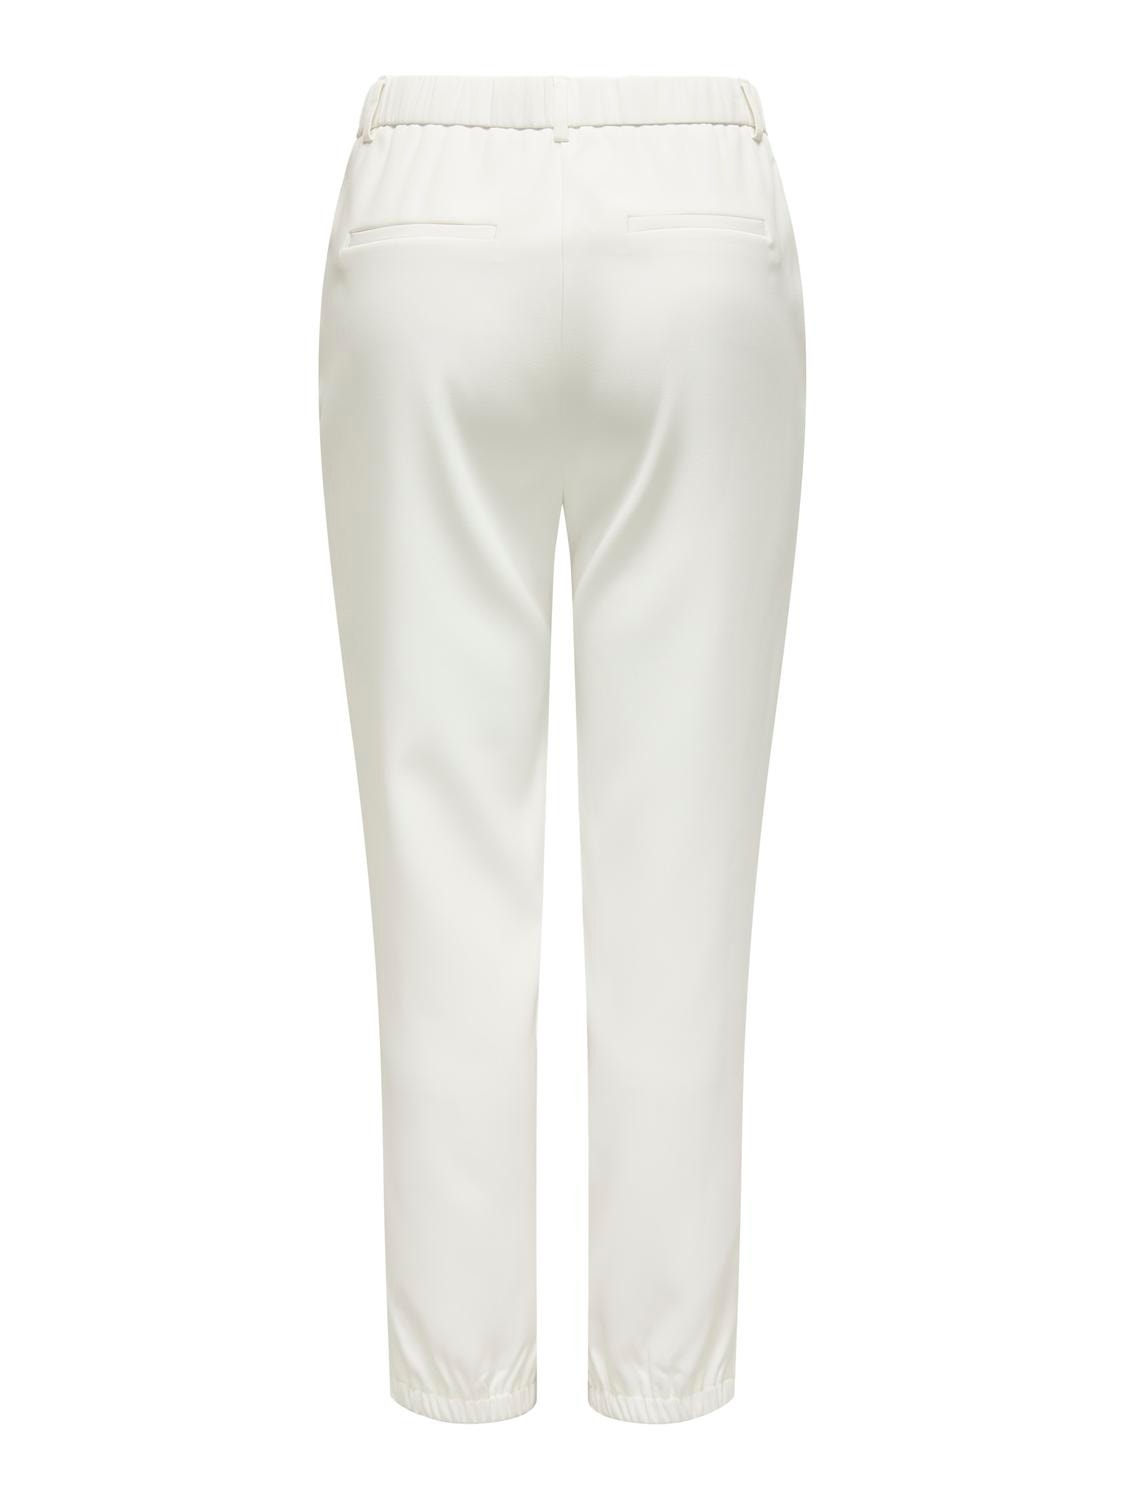 ONLY Regular Fit Mid waist Trousers -Bright White - 15311117